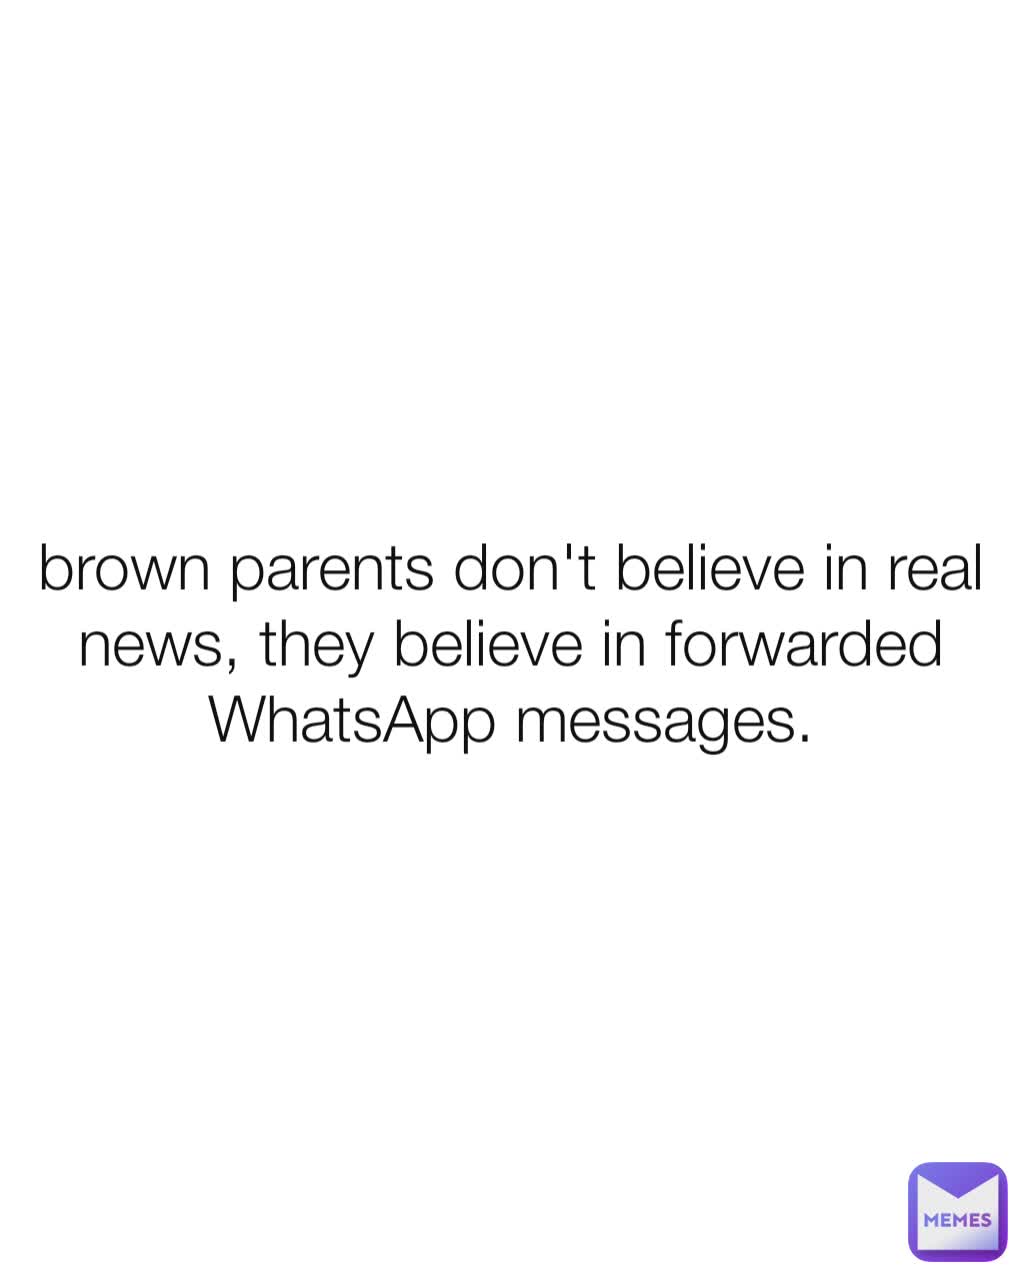 brown parents don't believe in real news, they believe in forwarded WhatsApp messages.